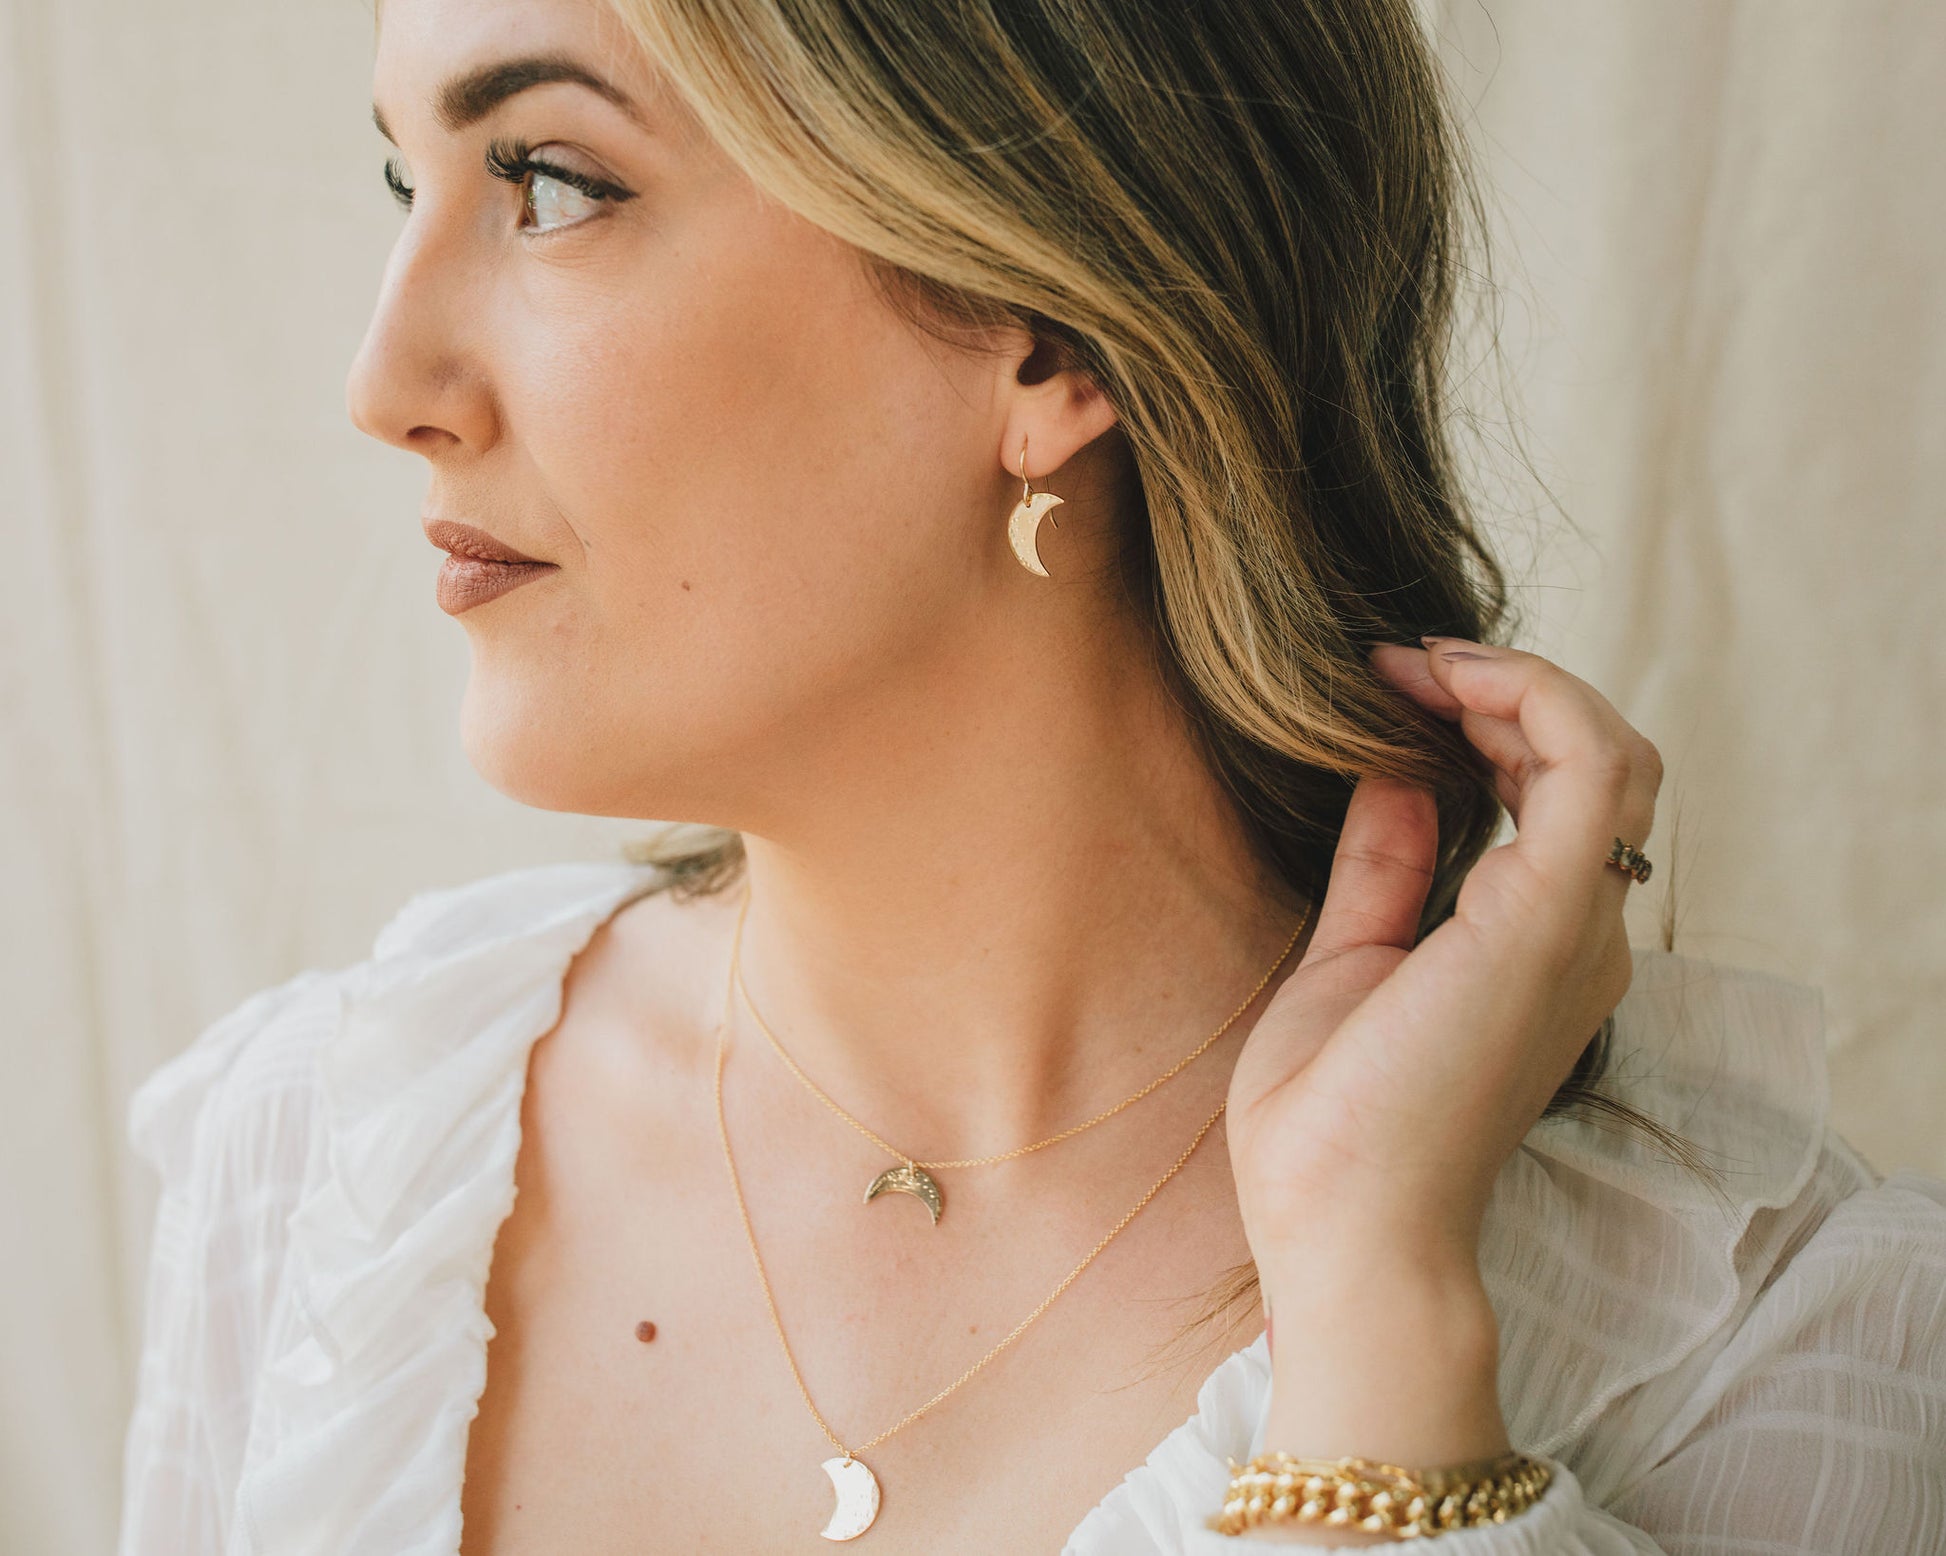 Model is wearing the 14 karat gold fill earrings and necklaces. Share these meaningful celestial treasures with your BFF crew and crystallize your cosmic connections with high quality handcrafted Wearable Love Jewelry they will wear for years to come